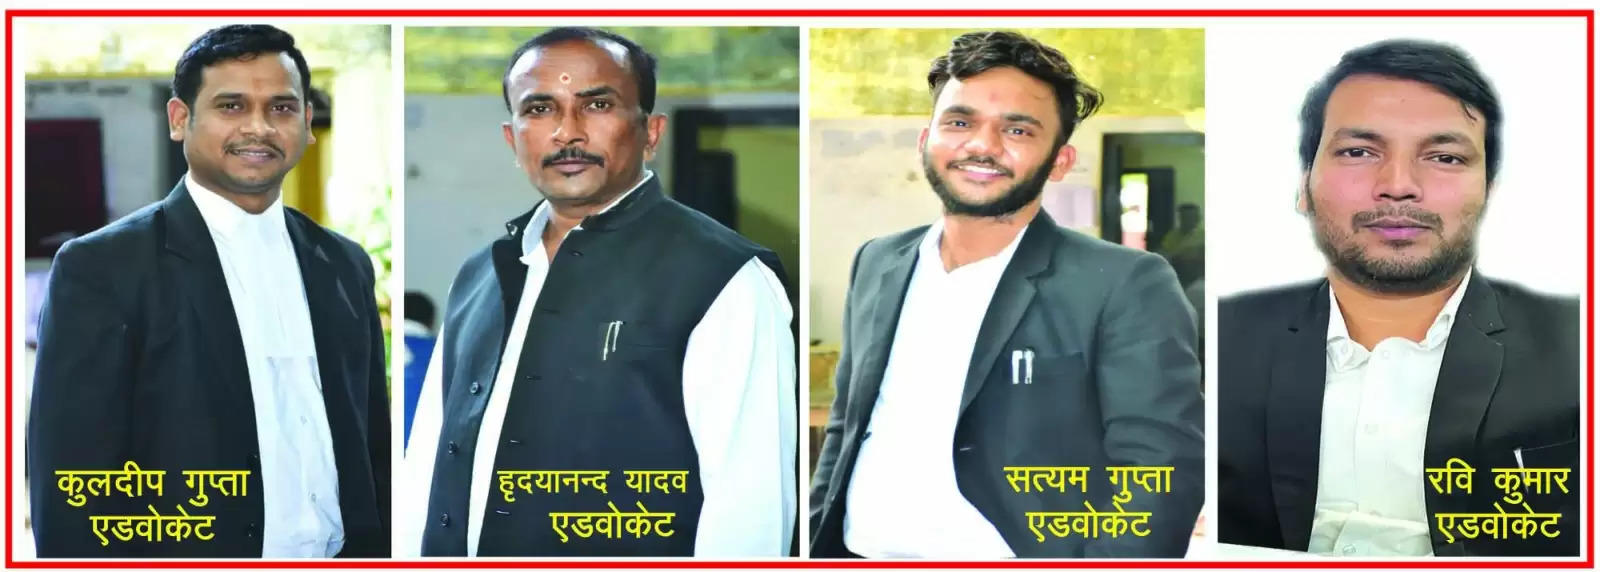 Varanasi News: Two accused acquitted due to lack of evidence